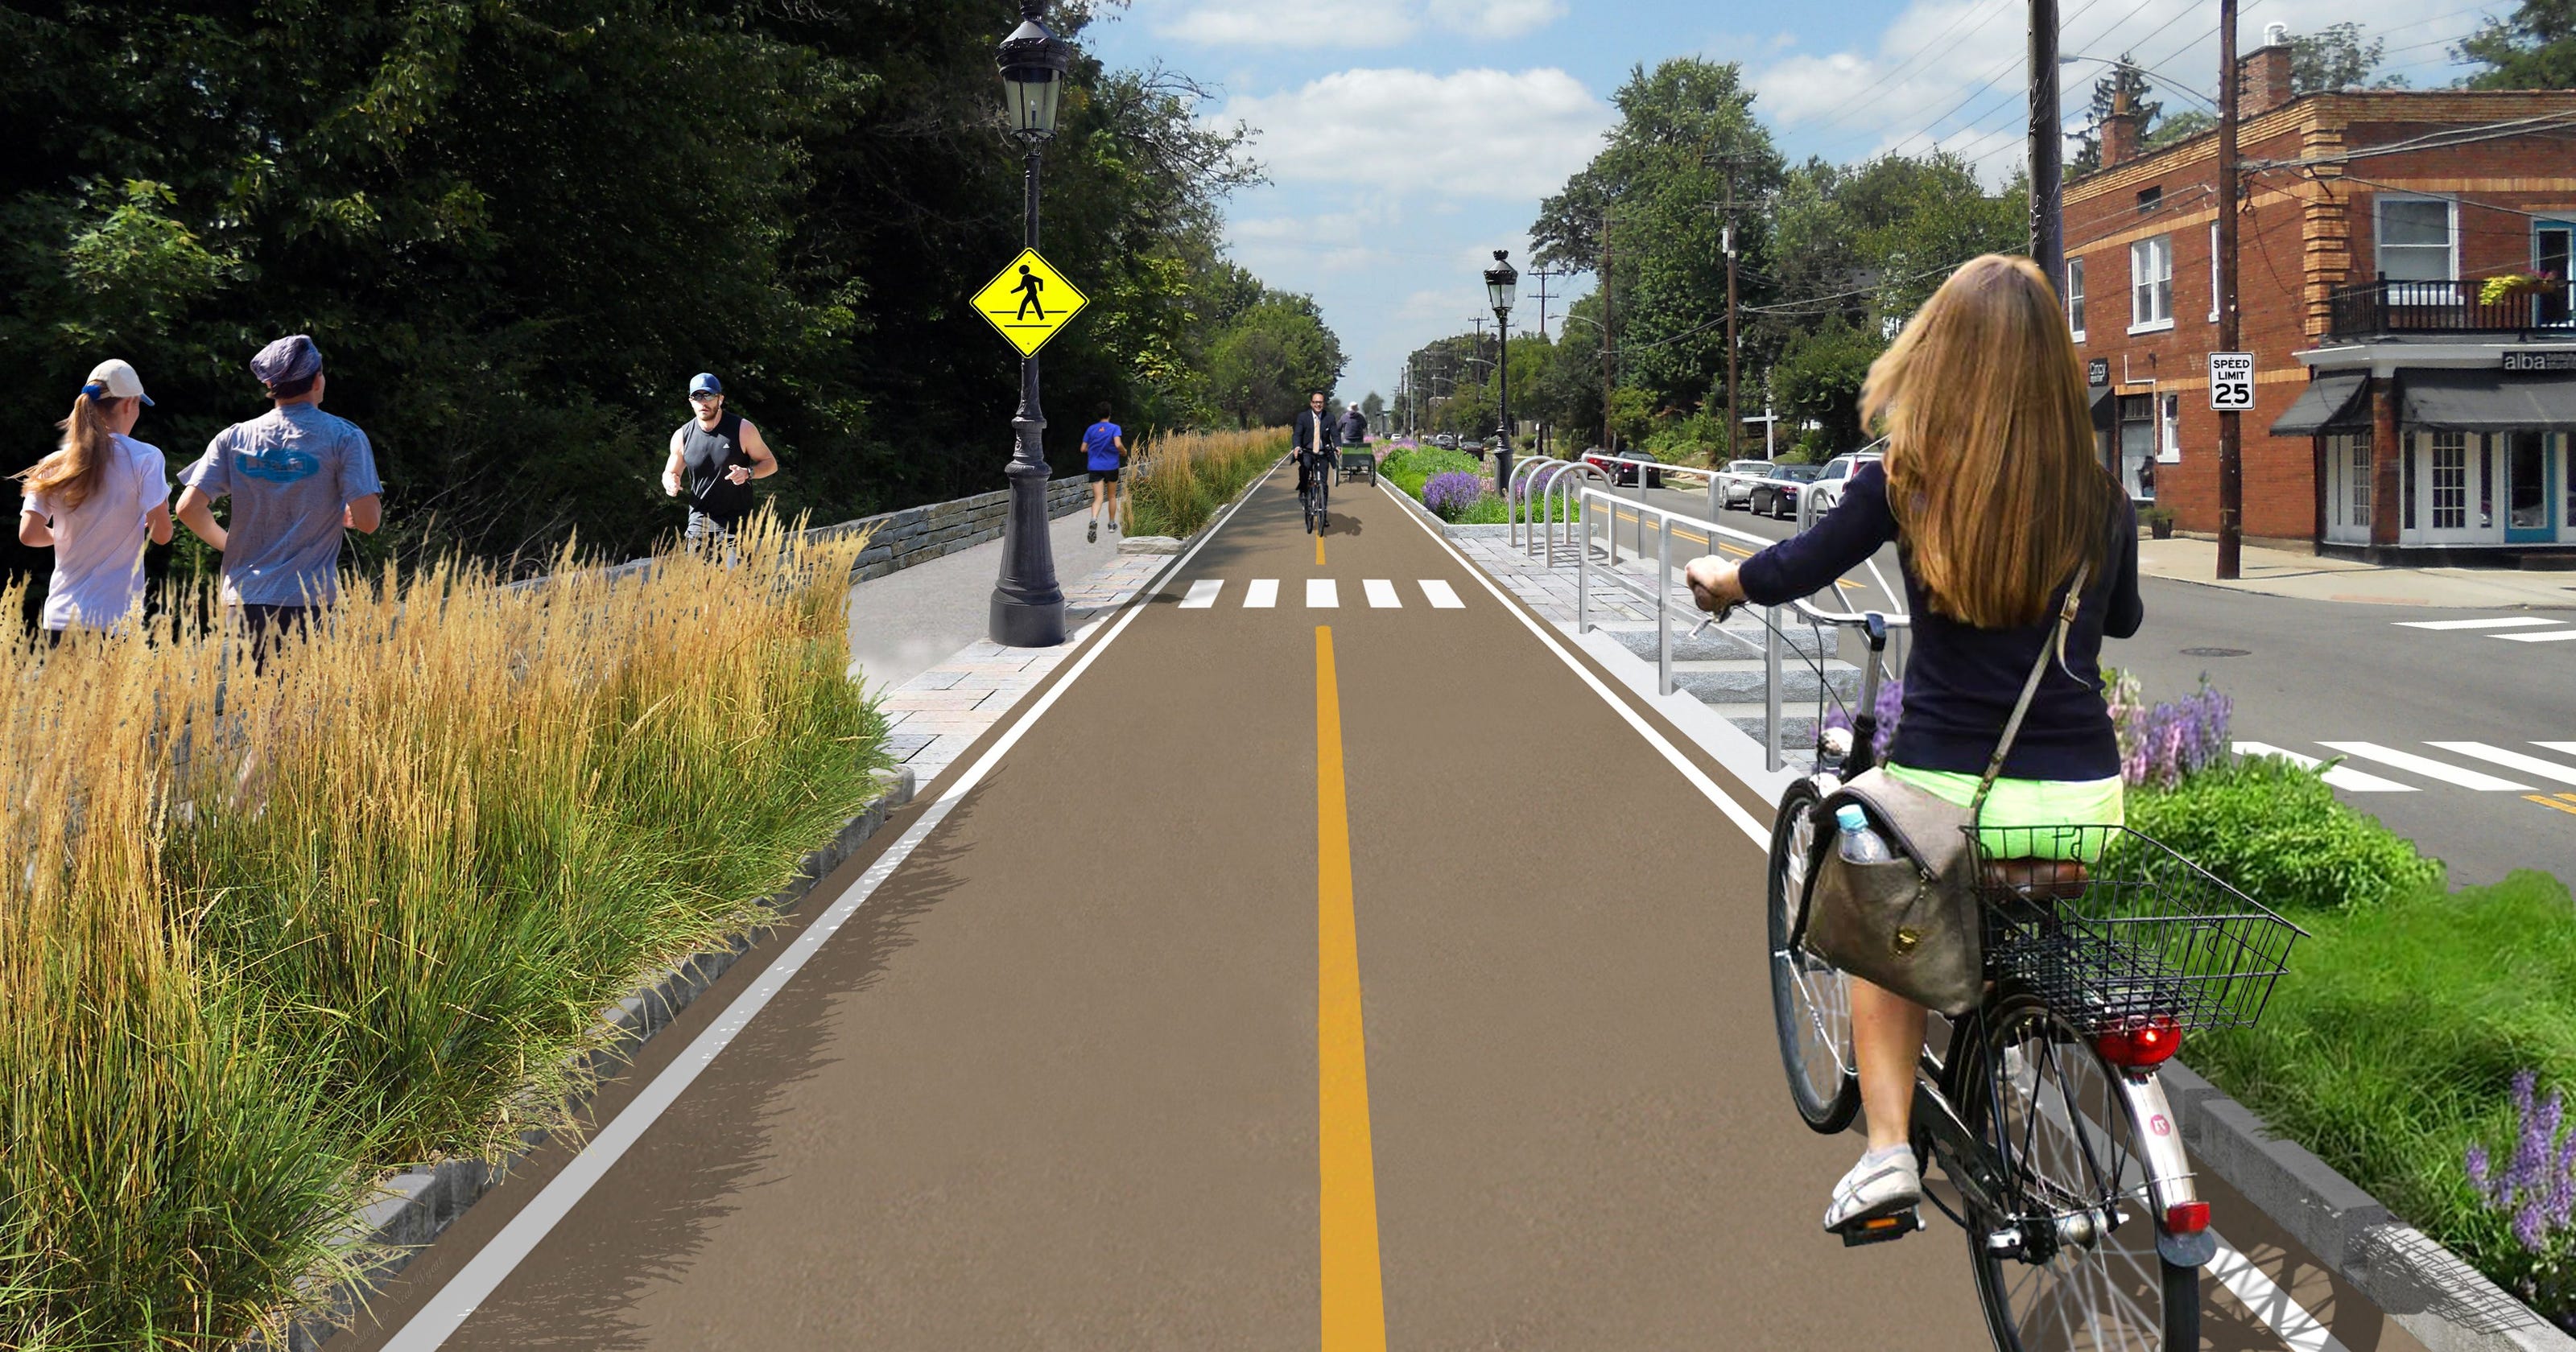 The Wasson Way, which will connect Xavier's campus to nearby Hyde Park, the Little Miami Bike Trail and eventually along the Ohio to Erie Trail 